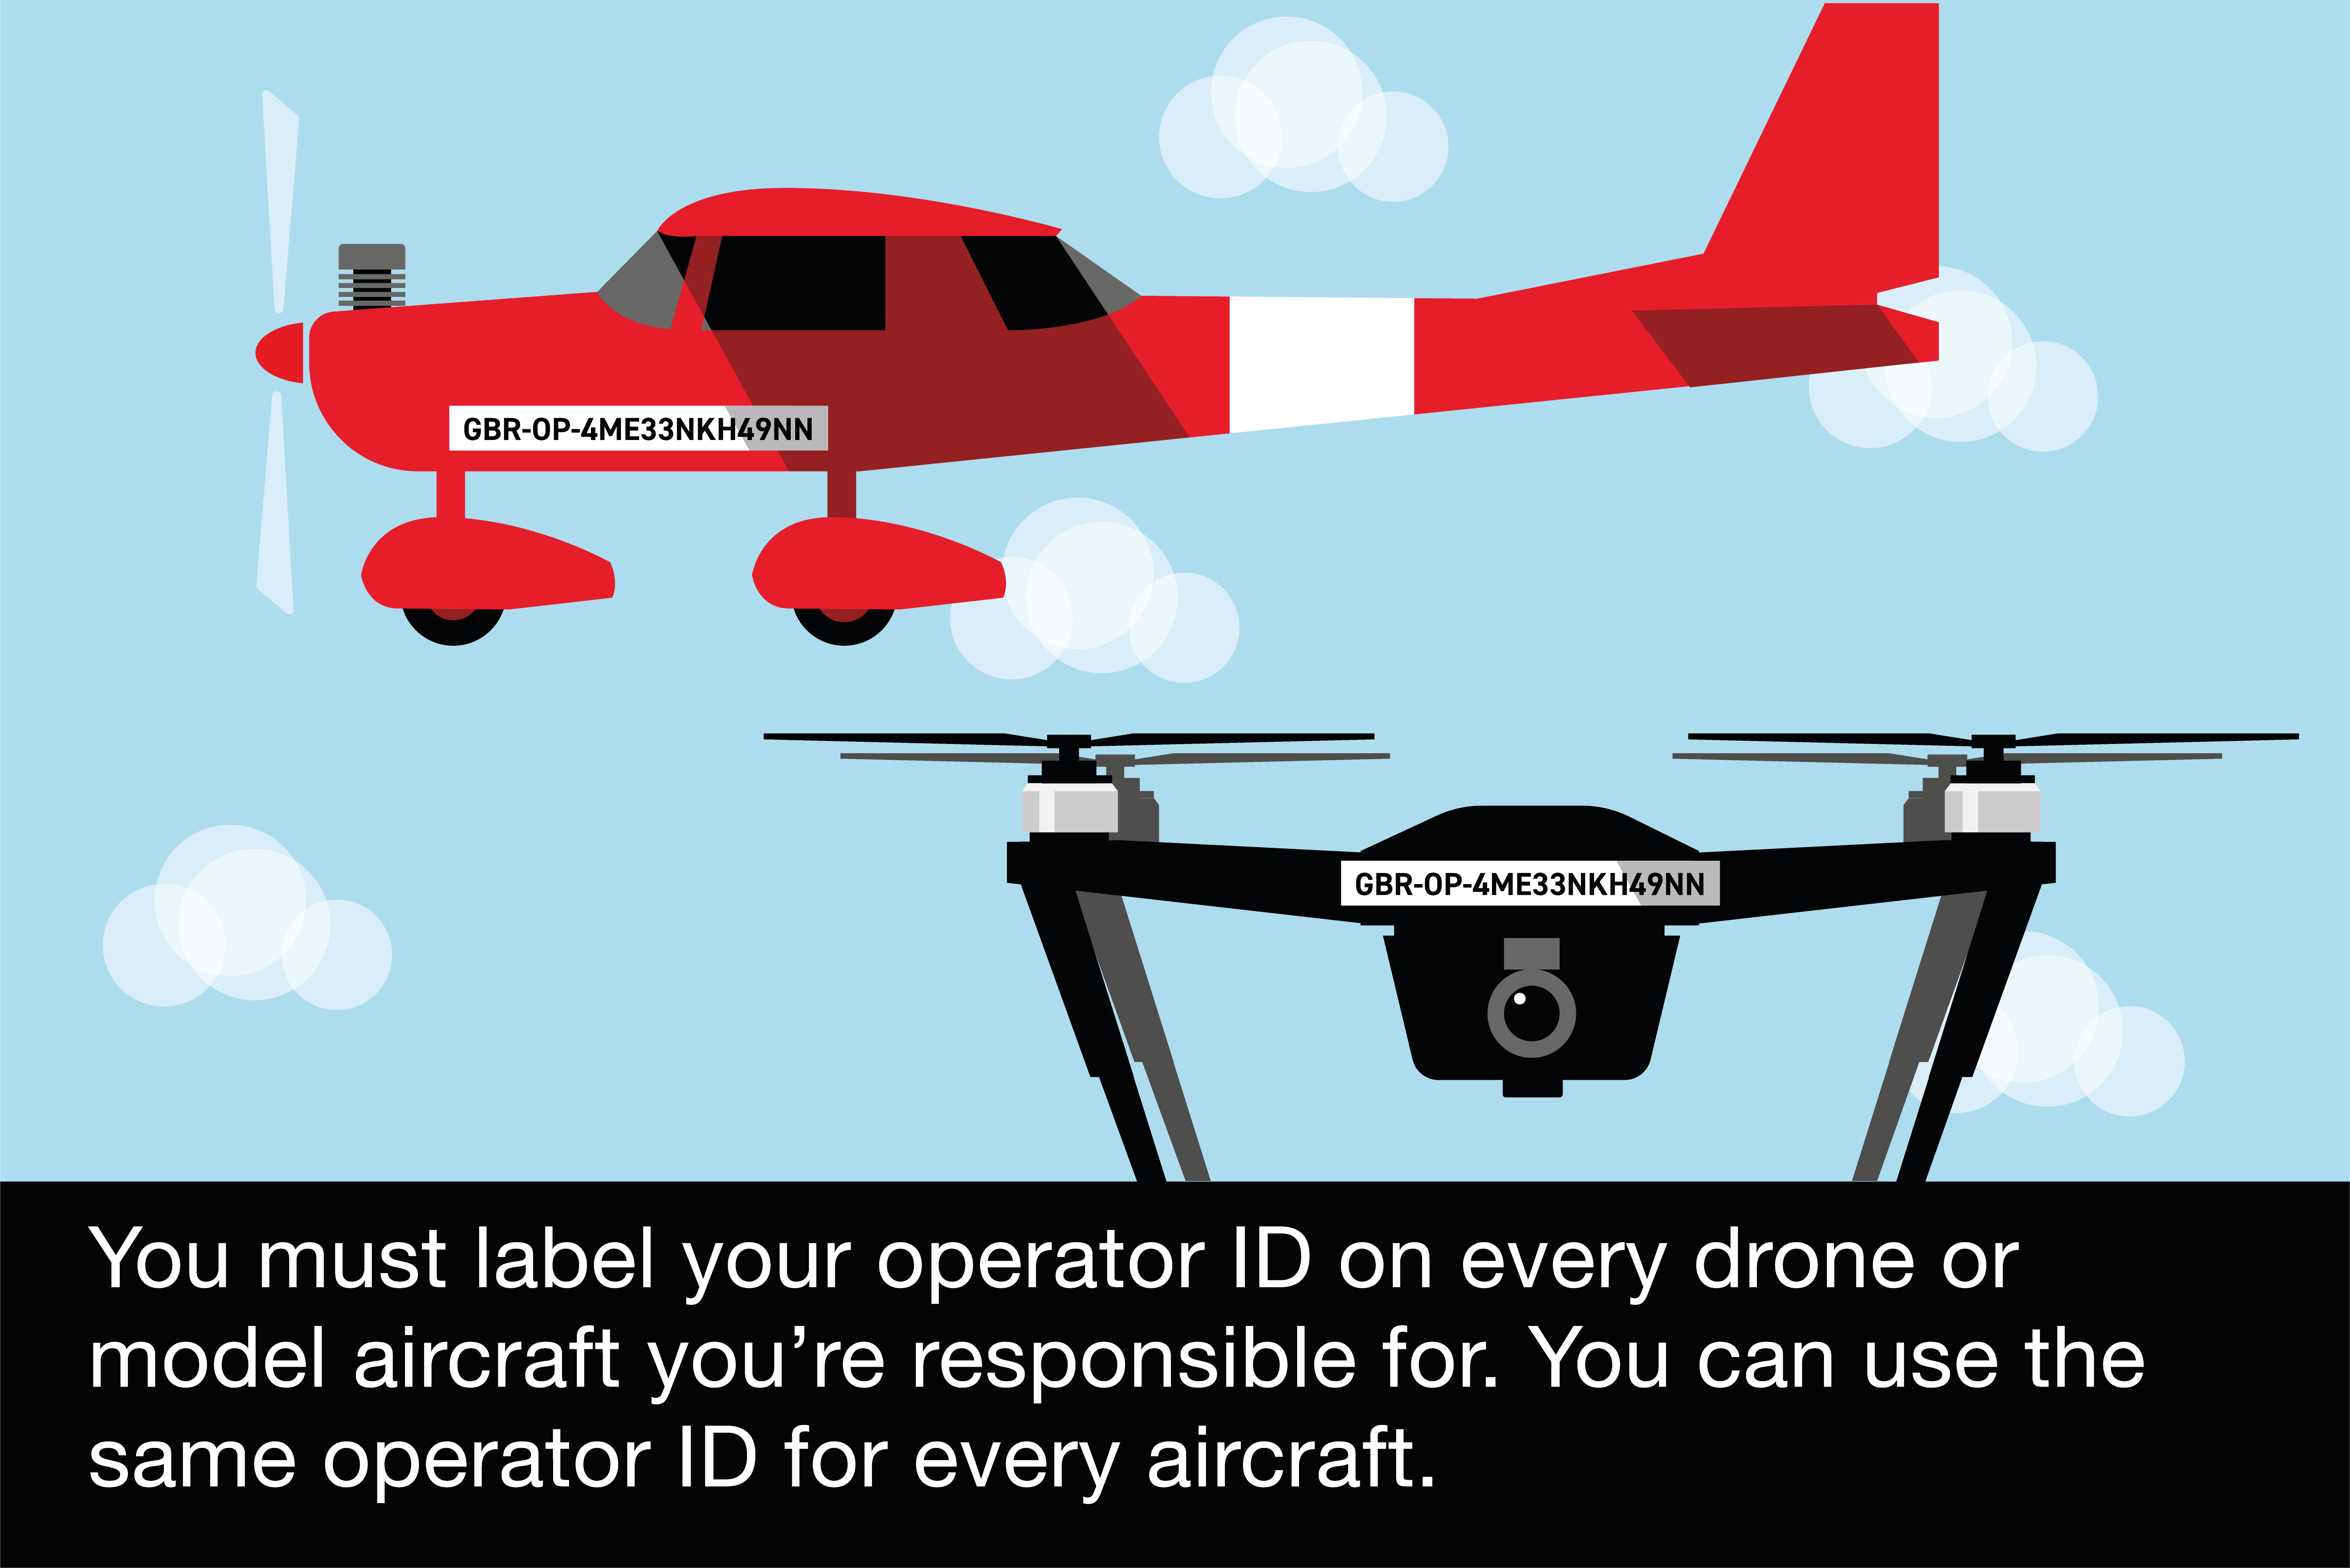 You must label your operator ID on every drone or model aircraft you're responsible for. You can use the same operator ID for every aircraft